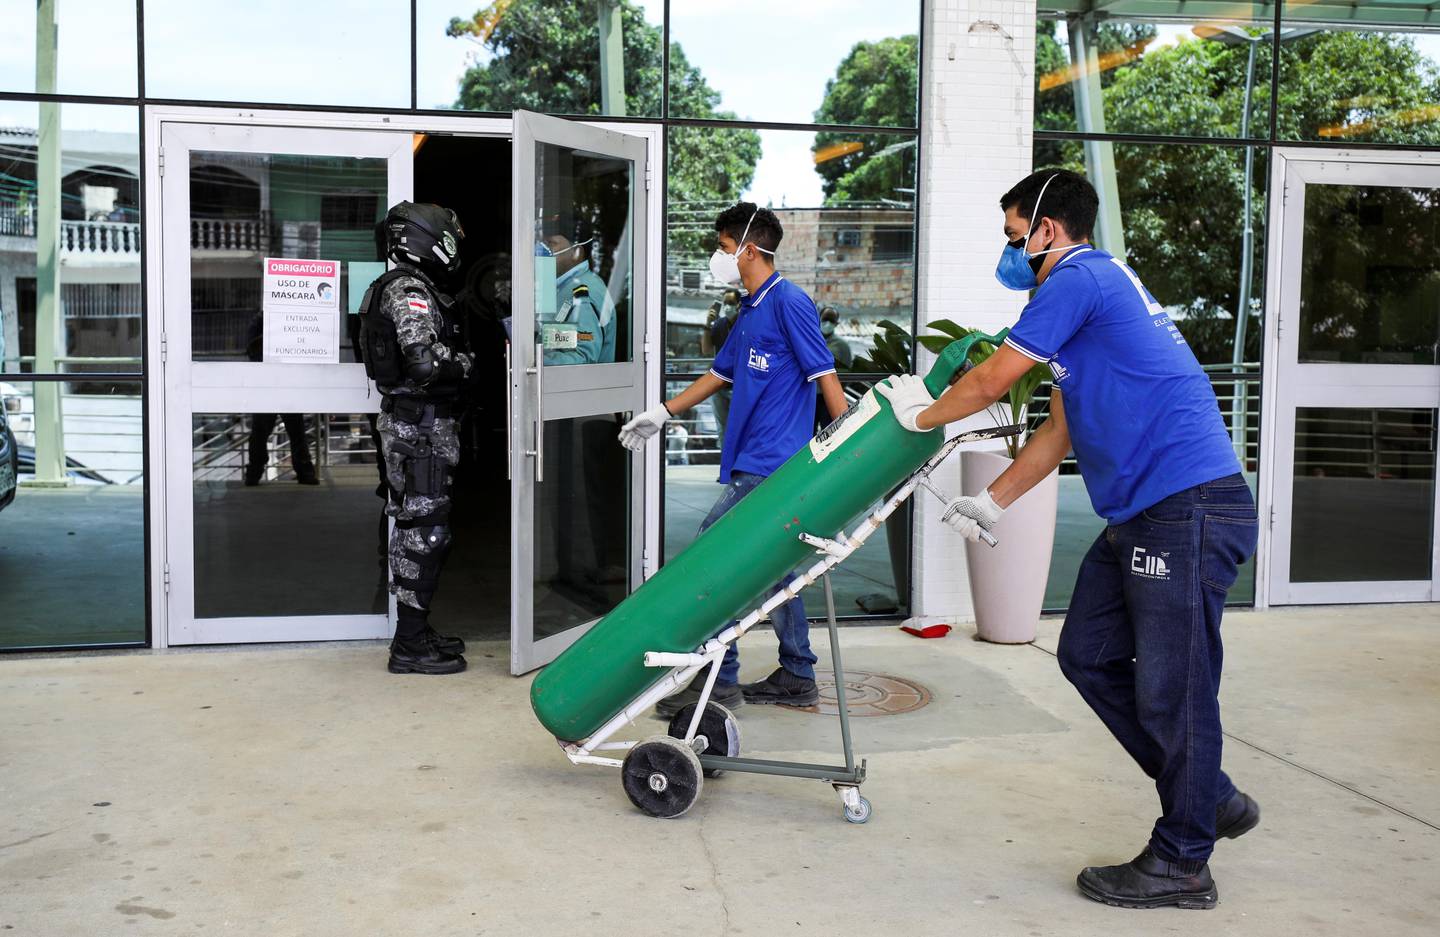 A worker arrives with an oxygen cylinder at Getulio Vargas hospital, amid the coronavirus disease (COVID-19) outbreak in Manaus, Brazil January 14, 2021. REUTERS/Bruno Kelly